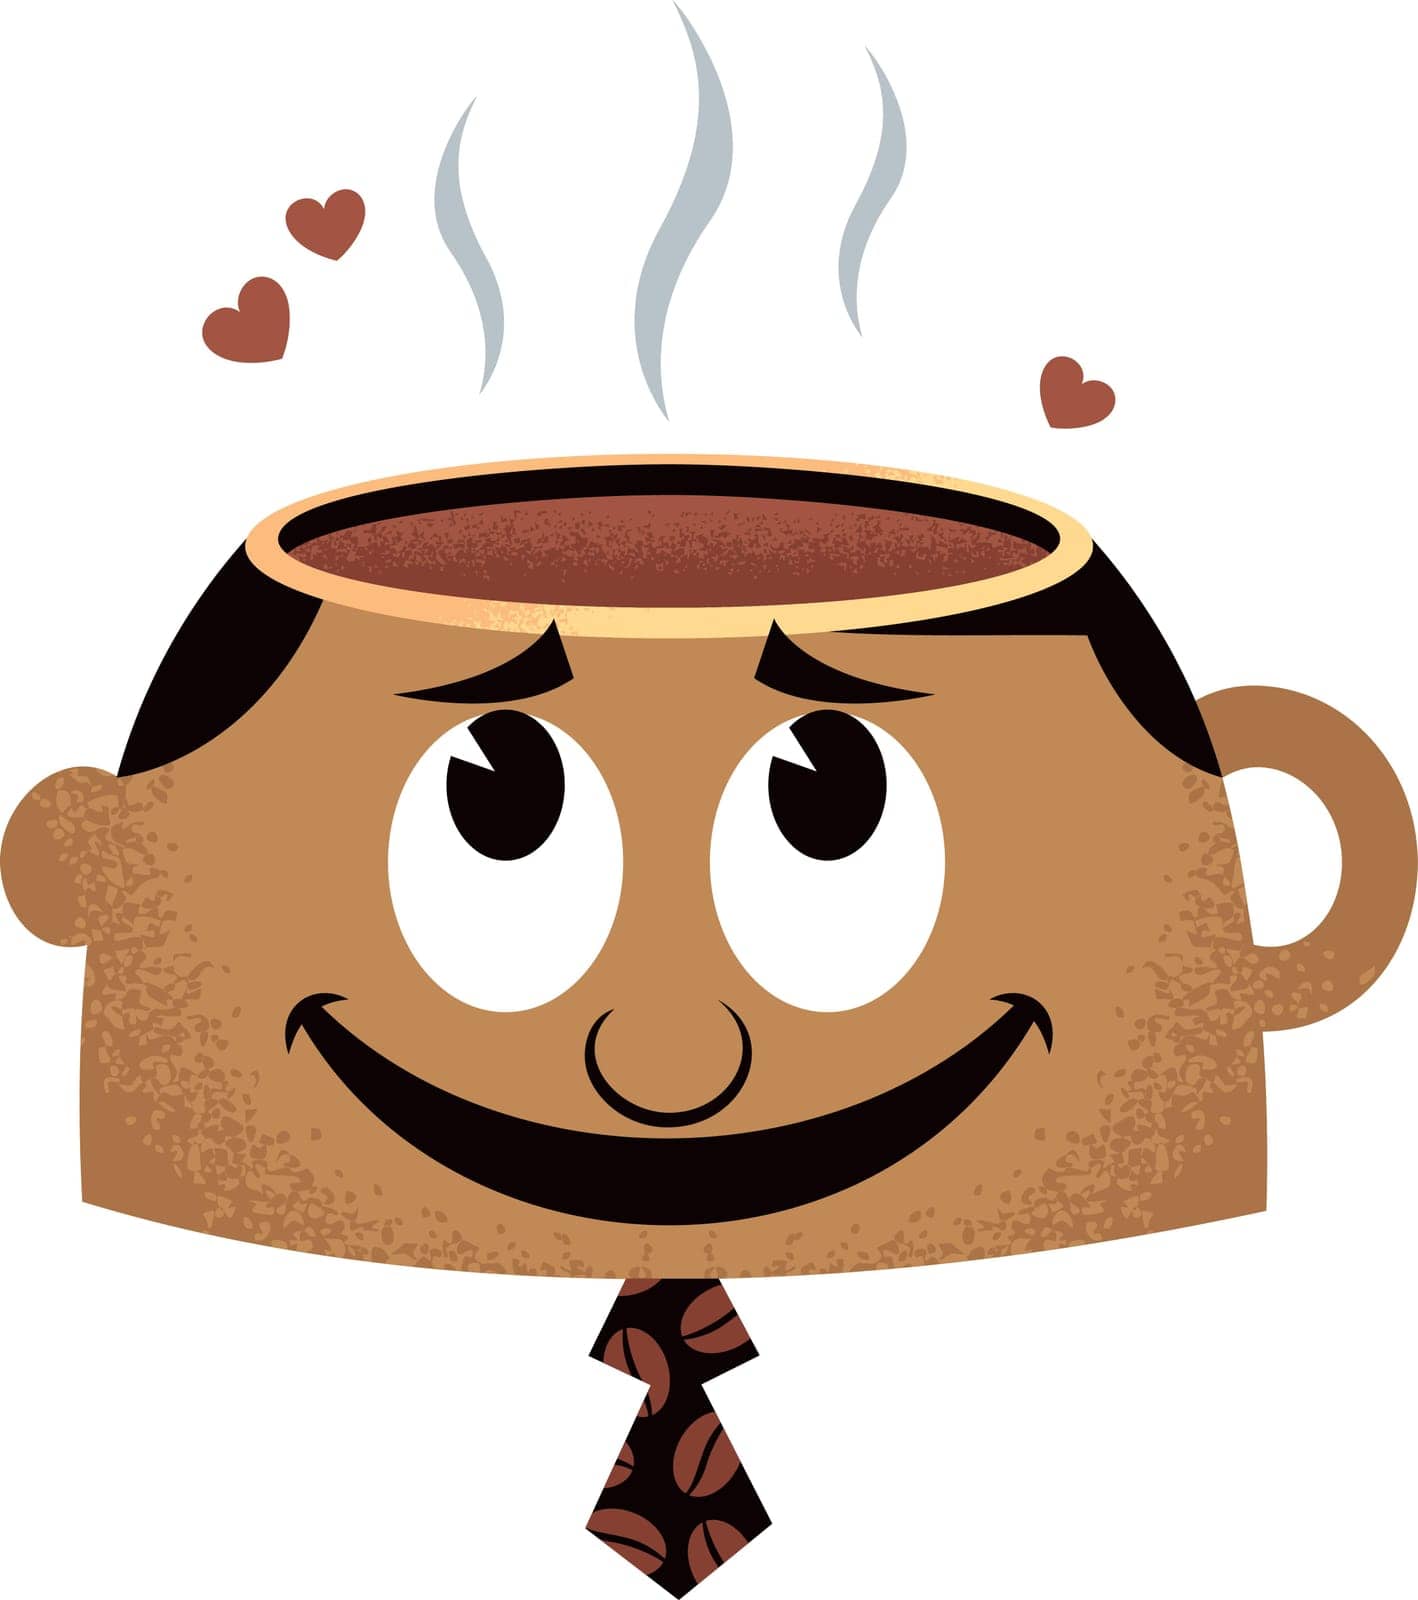 Concept illustration for coffee lover, with cartoon man shaped like a coffee mug.